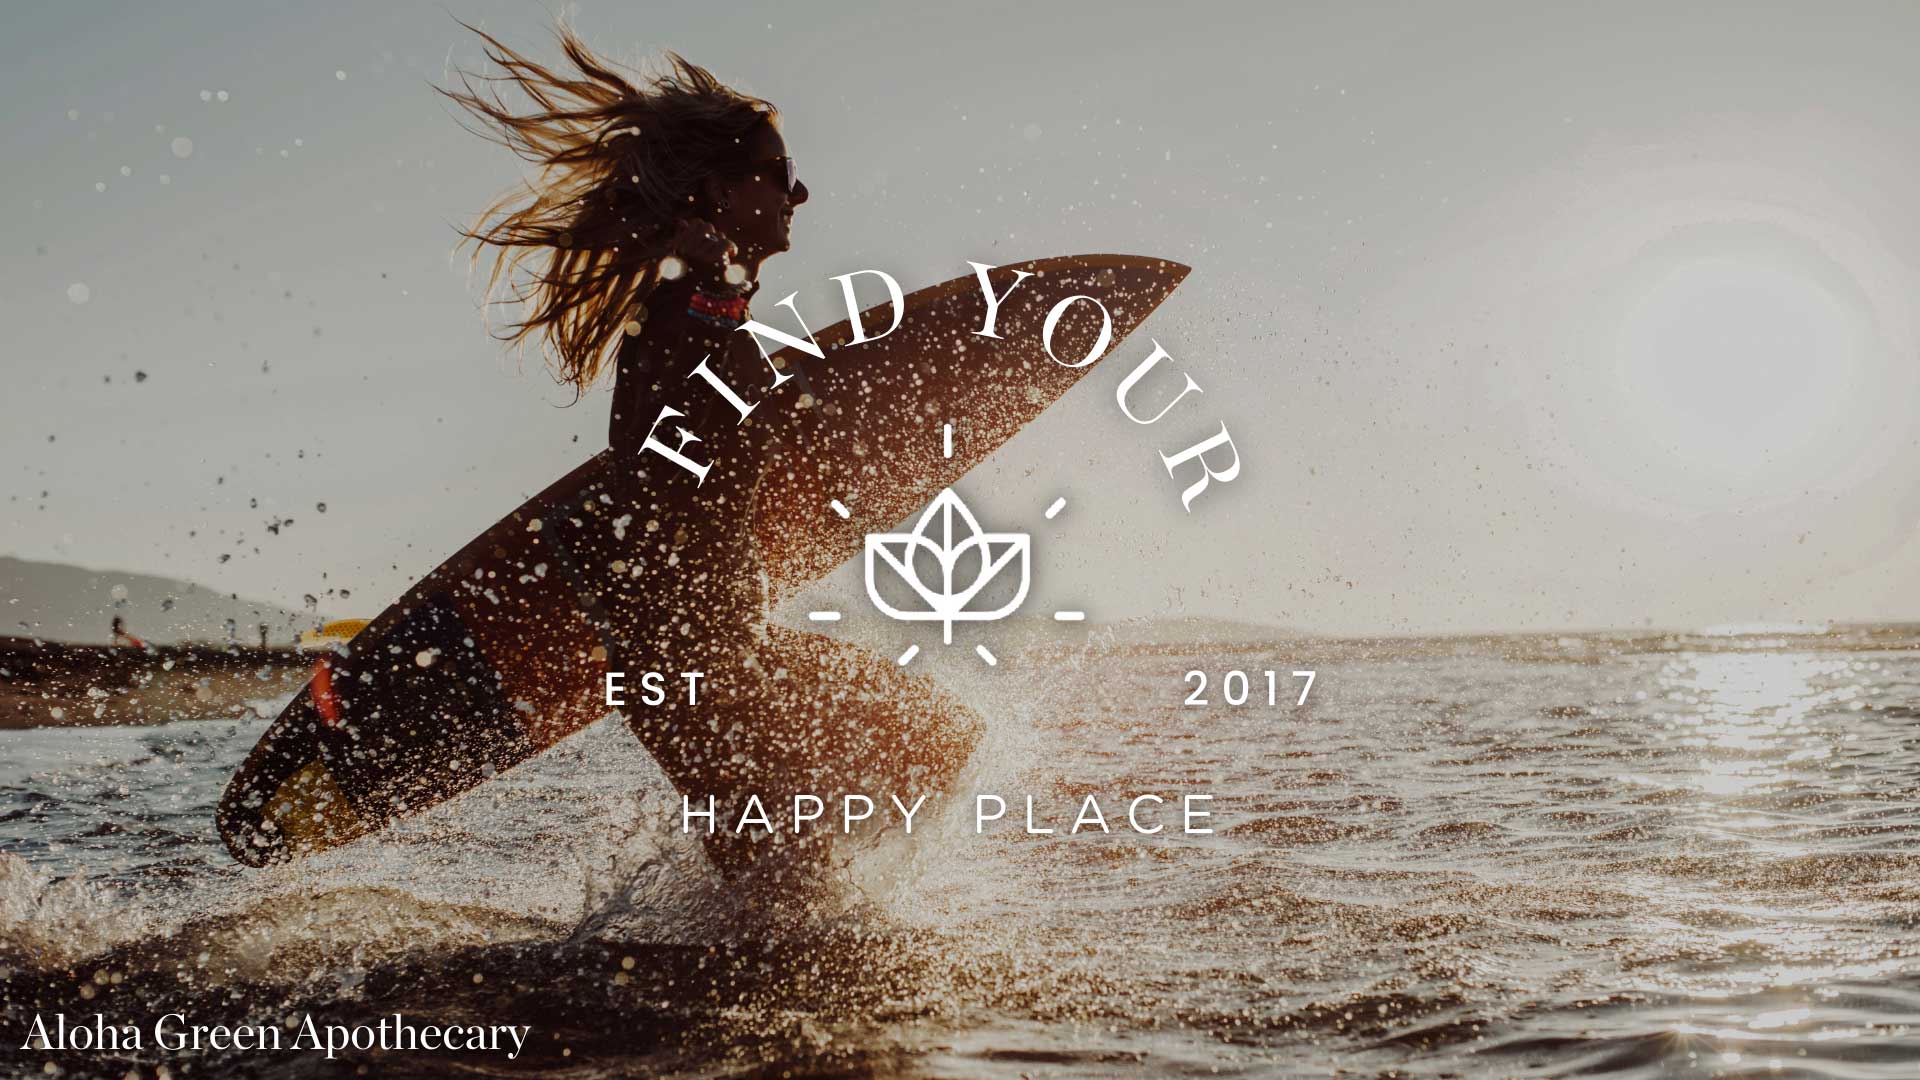 Find Your Happy Place at Aloha Green Apothecary